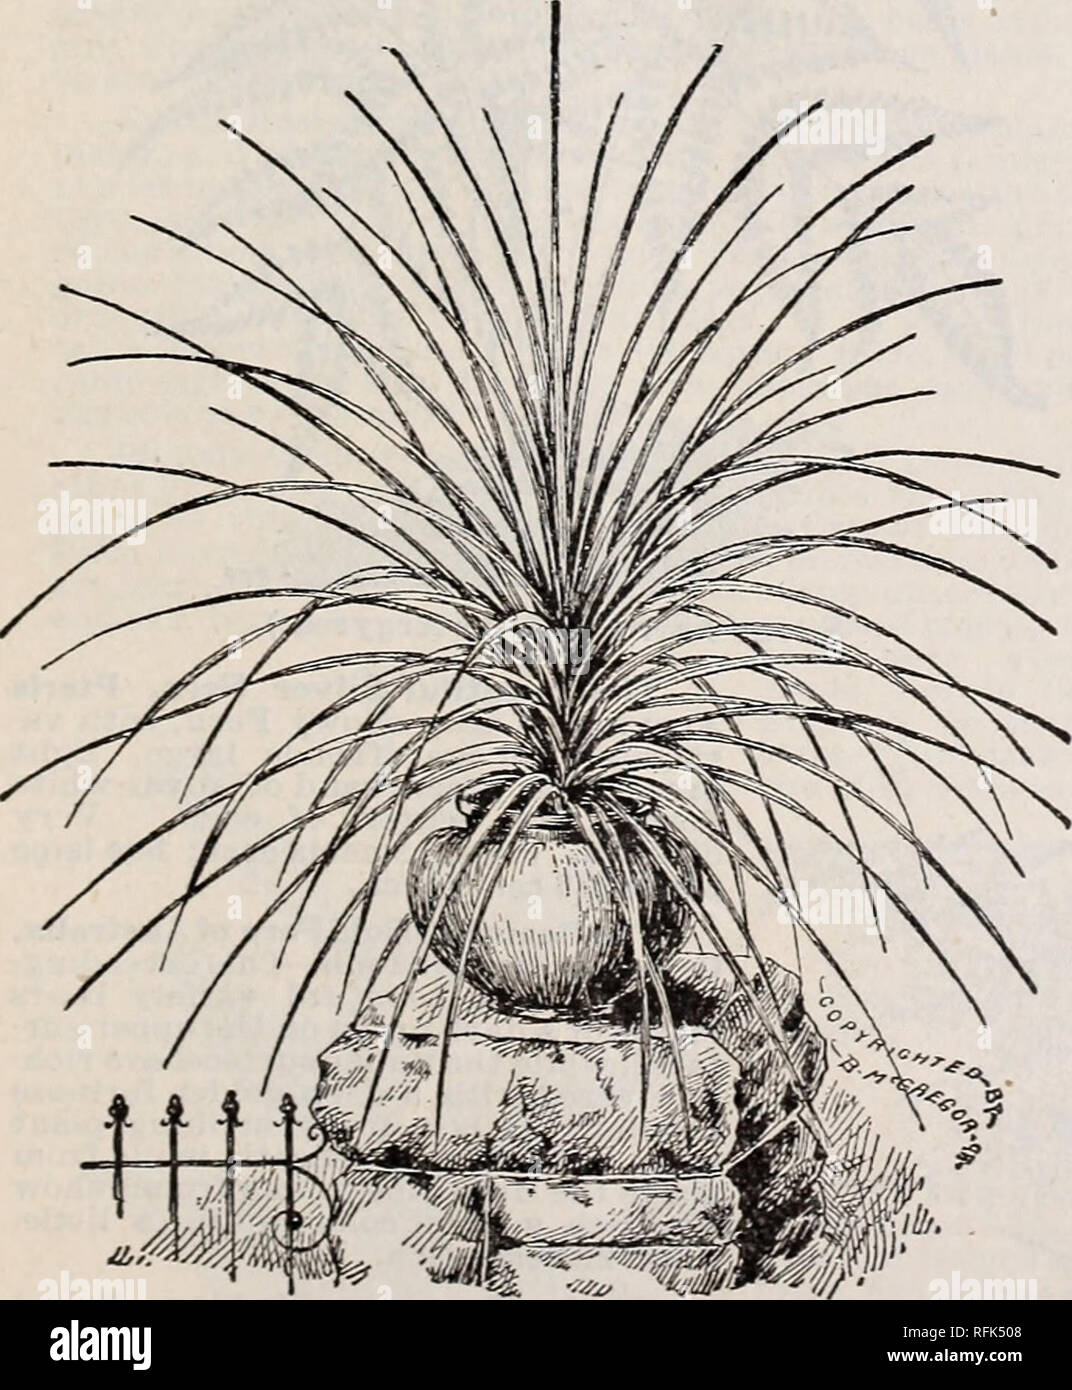 . Floral gems for winter flowering: autumn 1899. Nurseries (Horticulture) Ohio Springfield Catalogs; Plants, Ornamental Catalogs; Flowers Catalogs; Bulbs (Plants) Catalogs. Umbrella Plant. {Cyperus Alternifolius.) Umbrella Plant. {Cyperus Alteraifolius.) An ornamental grass, throwing up stems about two feet high, surmounted at the top with a whorl of leaves, diverging horizontally, giving it a very curious appearance. Splendid for the center of vases or as a water plant. Price, 10 cents each; large, handsome plants, 20 cents each.. Please note that these images are extracted from scanned page  Stock Photo